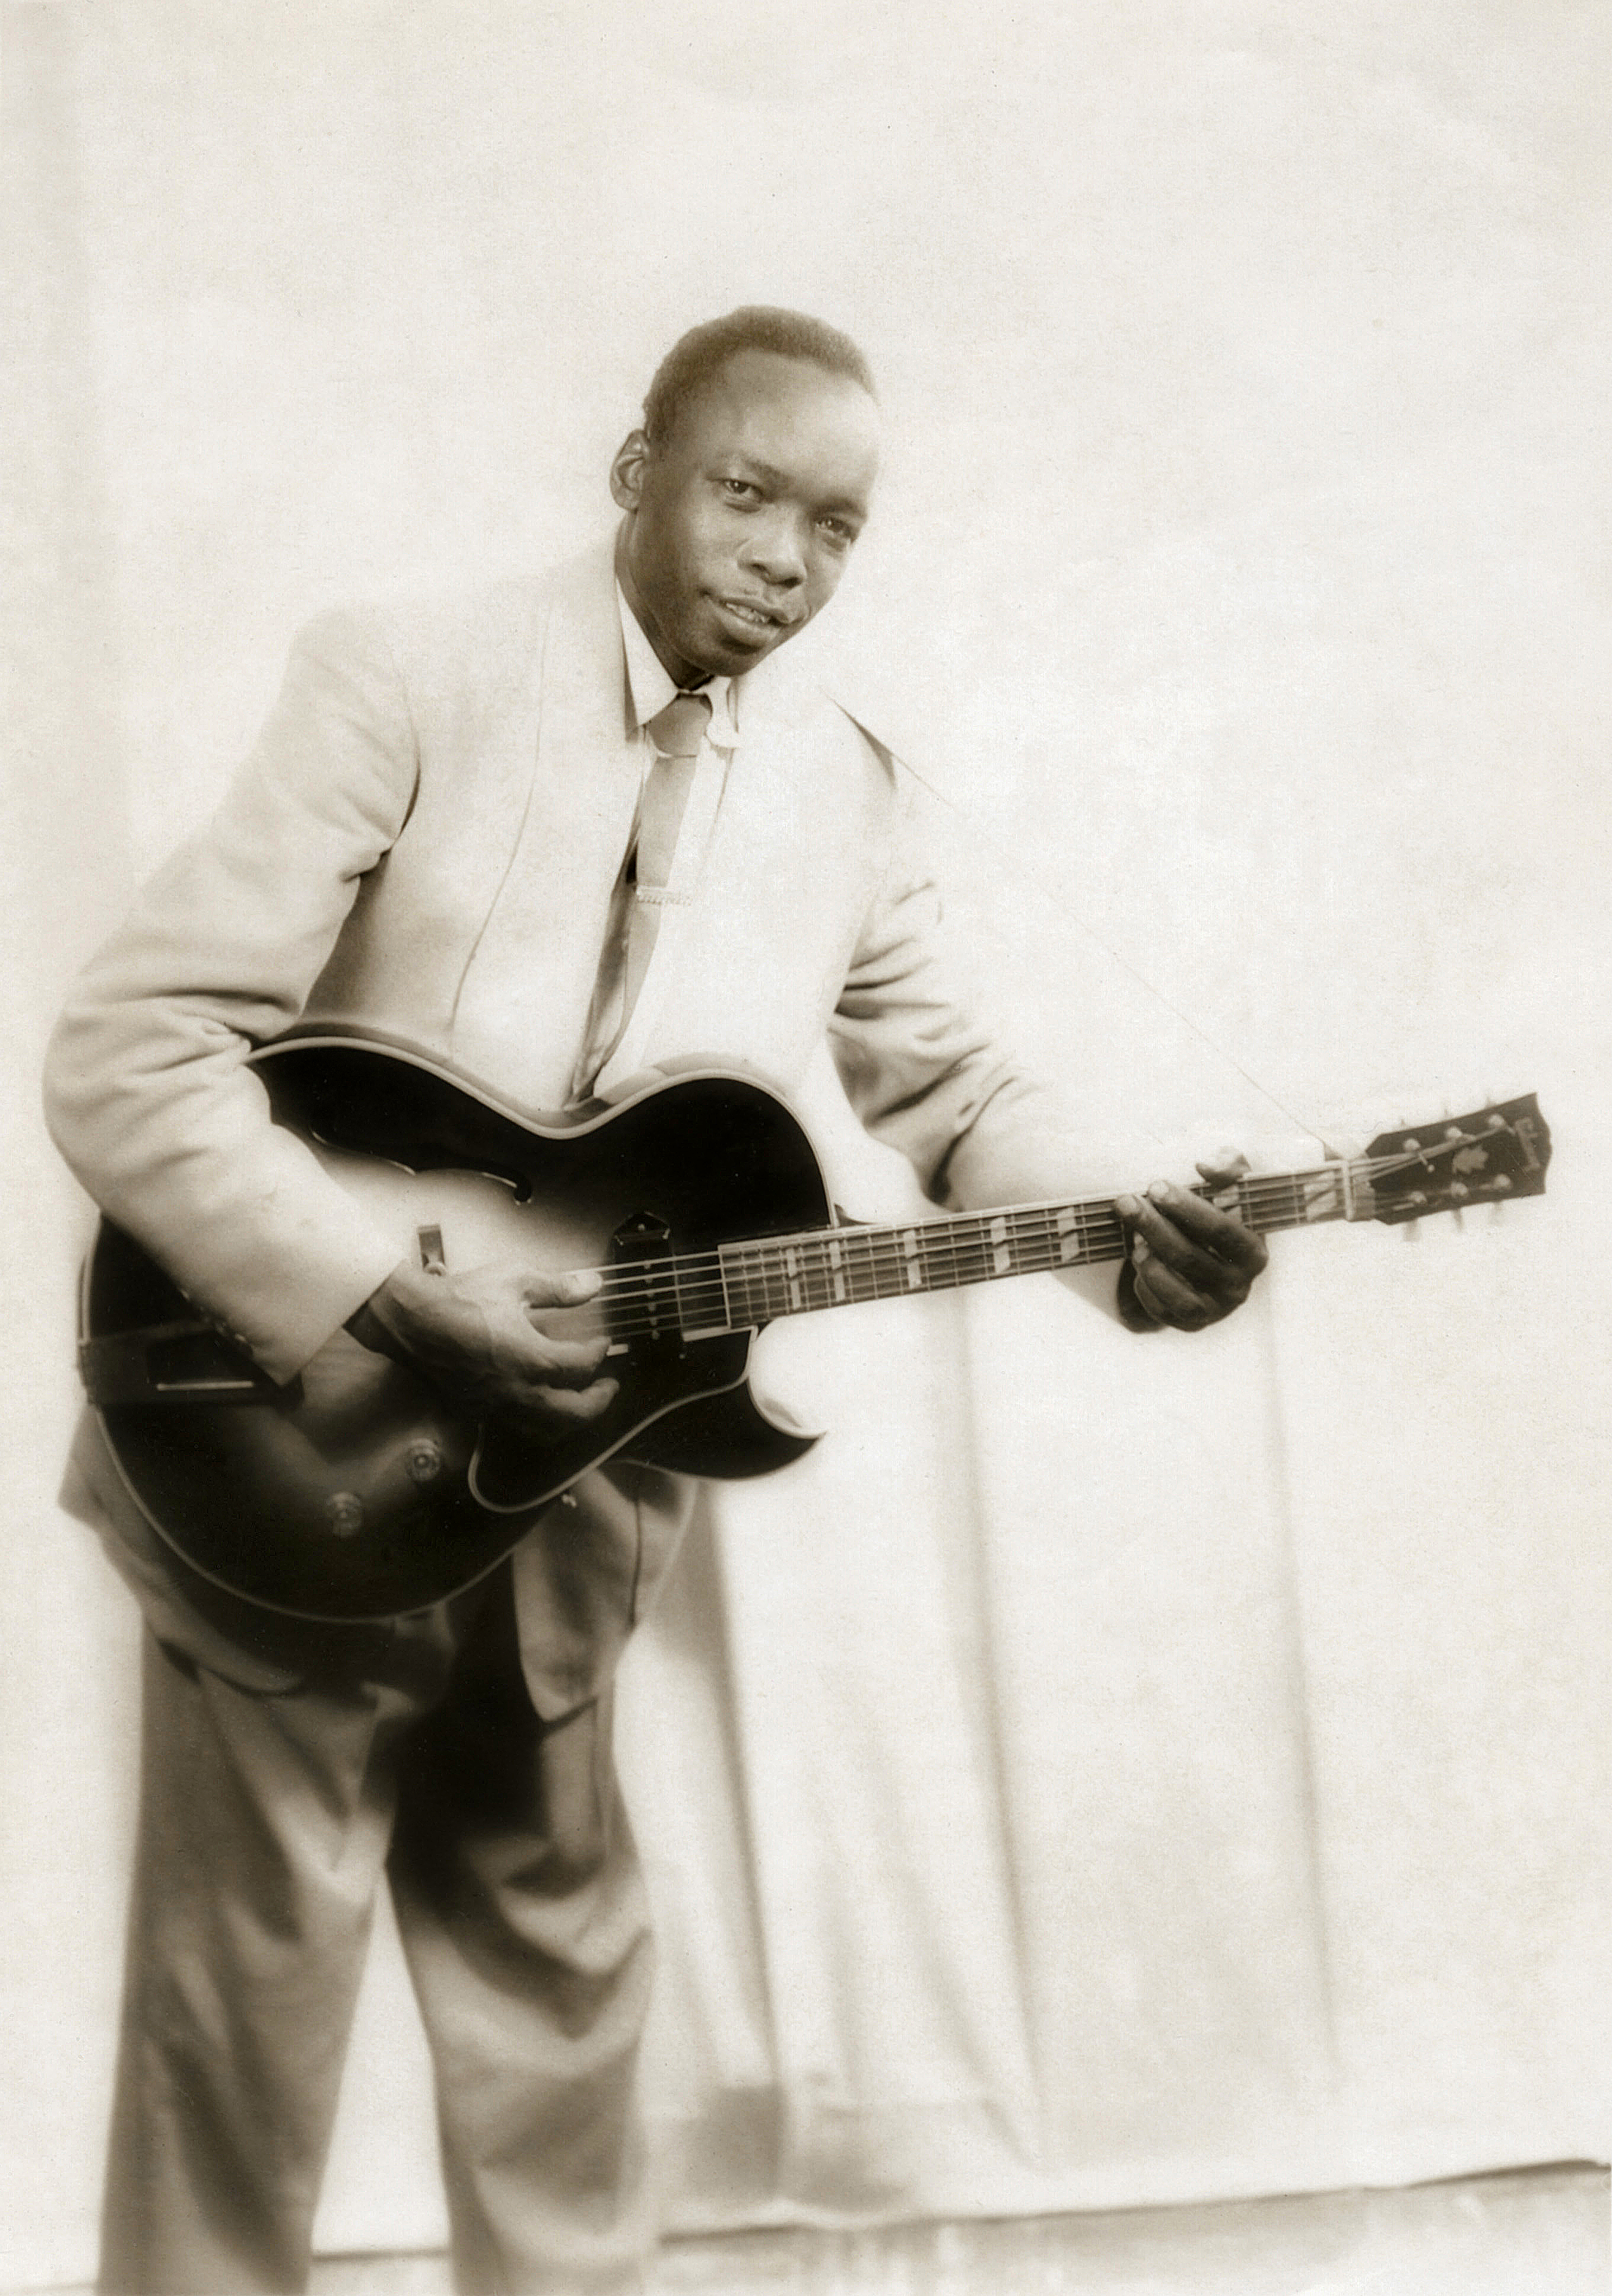 Messin' With the Hook: Our 1986 John Lee Hooker Feature